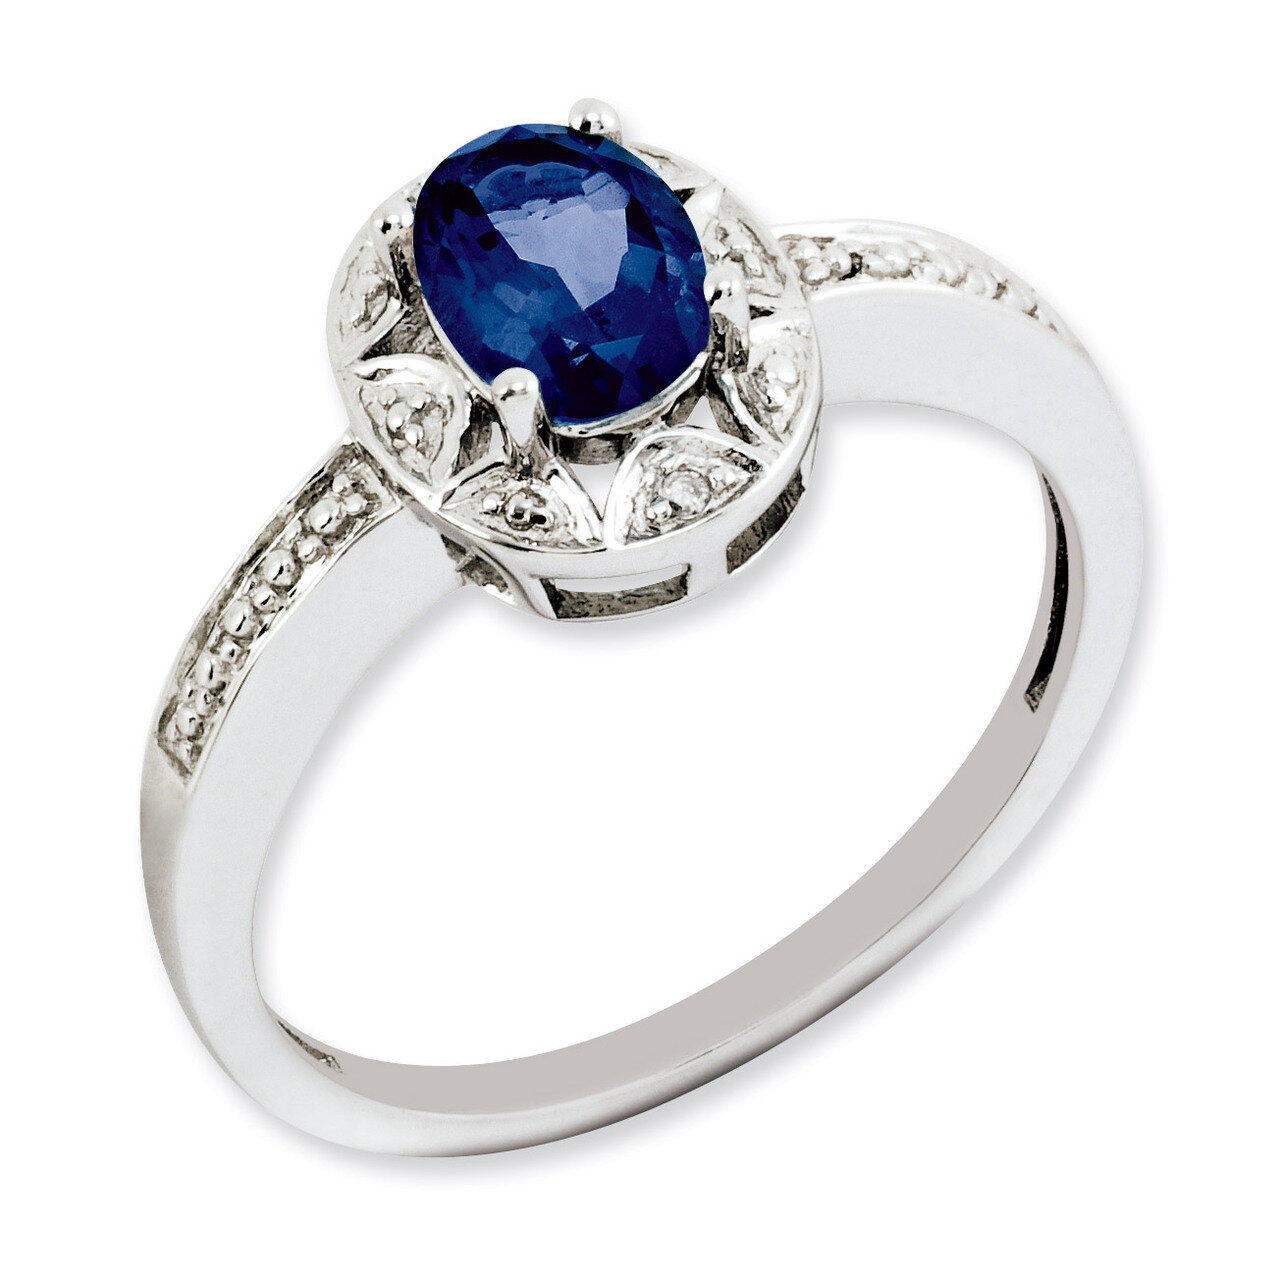 September Created Sapphire Ring Sterling Silver Diamond QBR10SEP